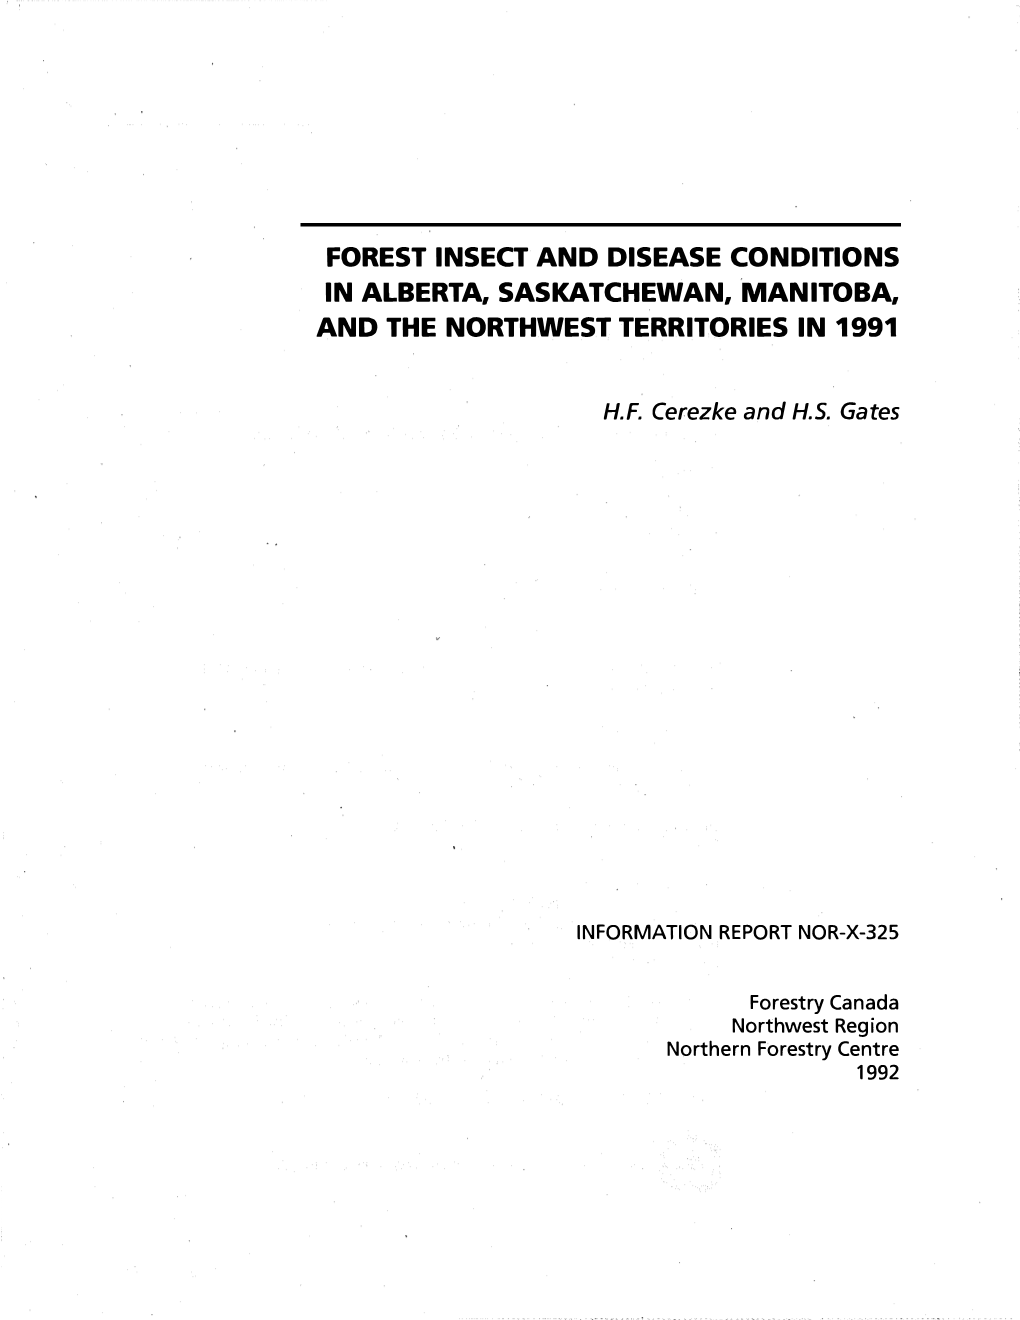 Forest Insect and Disease Conditions in Alberta, Saskatchewan, Manitoba, and the Northwest Territories in 1991